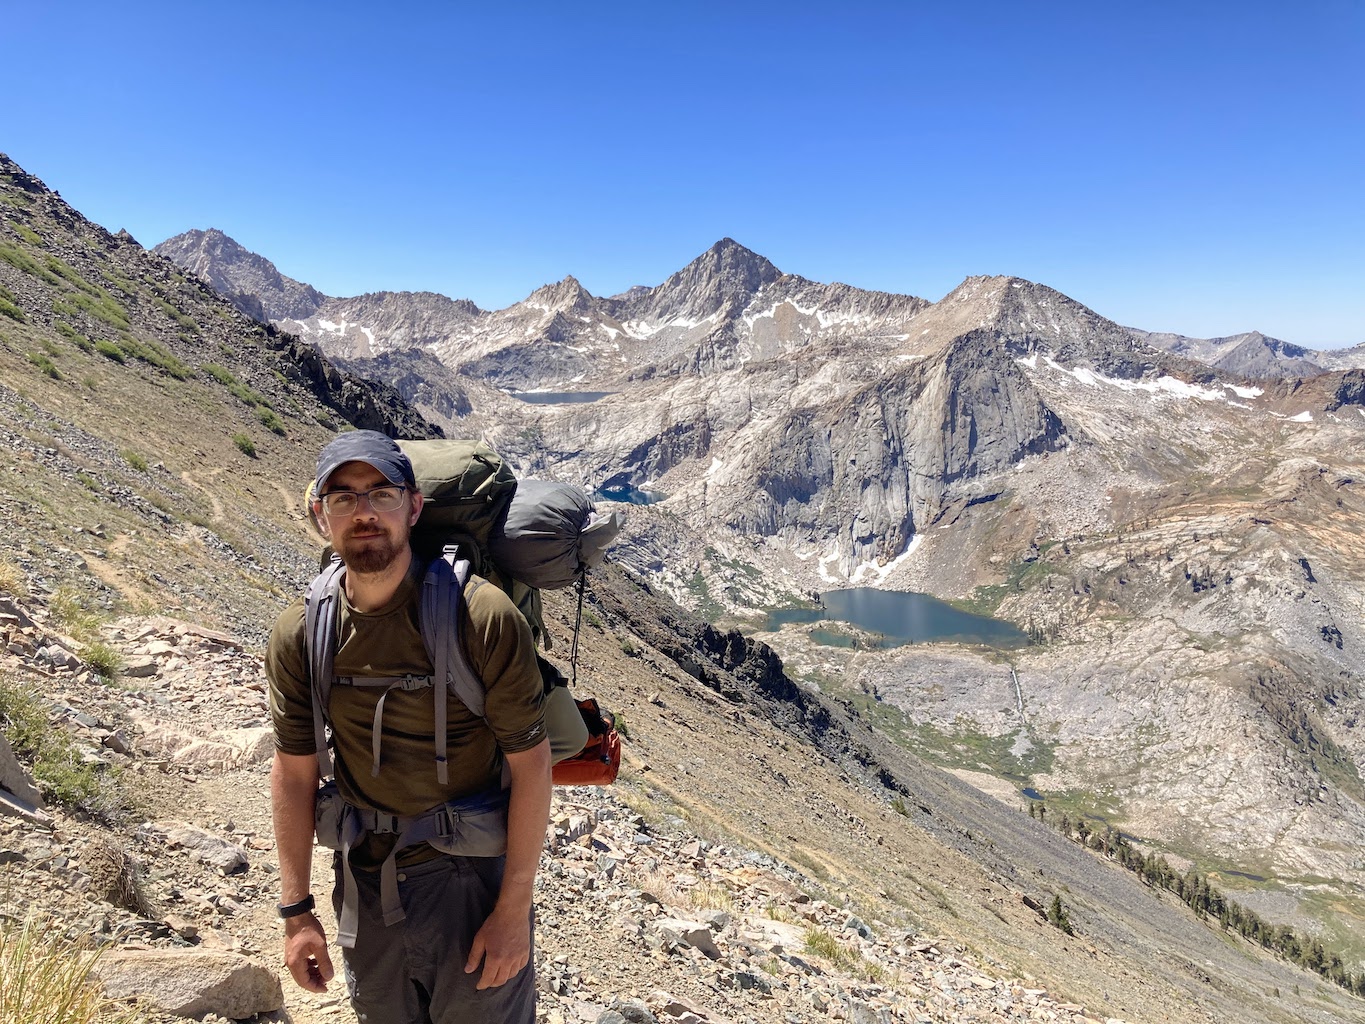 Backpacking in Sequoia National Park, July 2022.